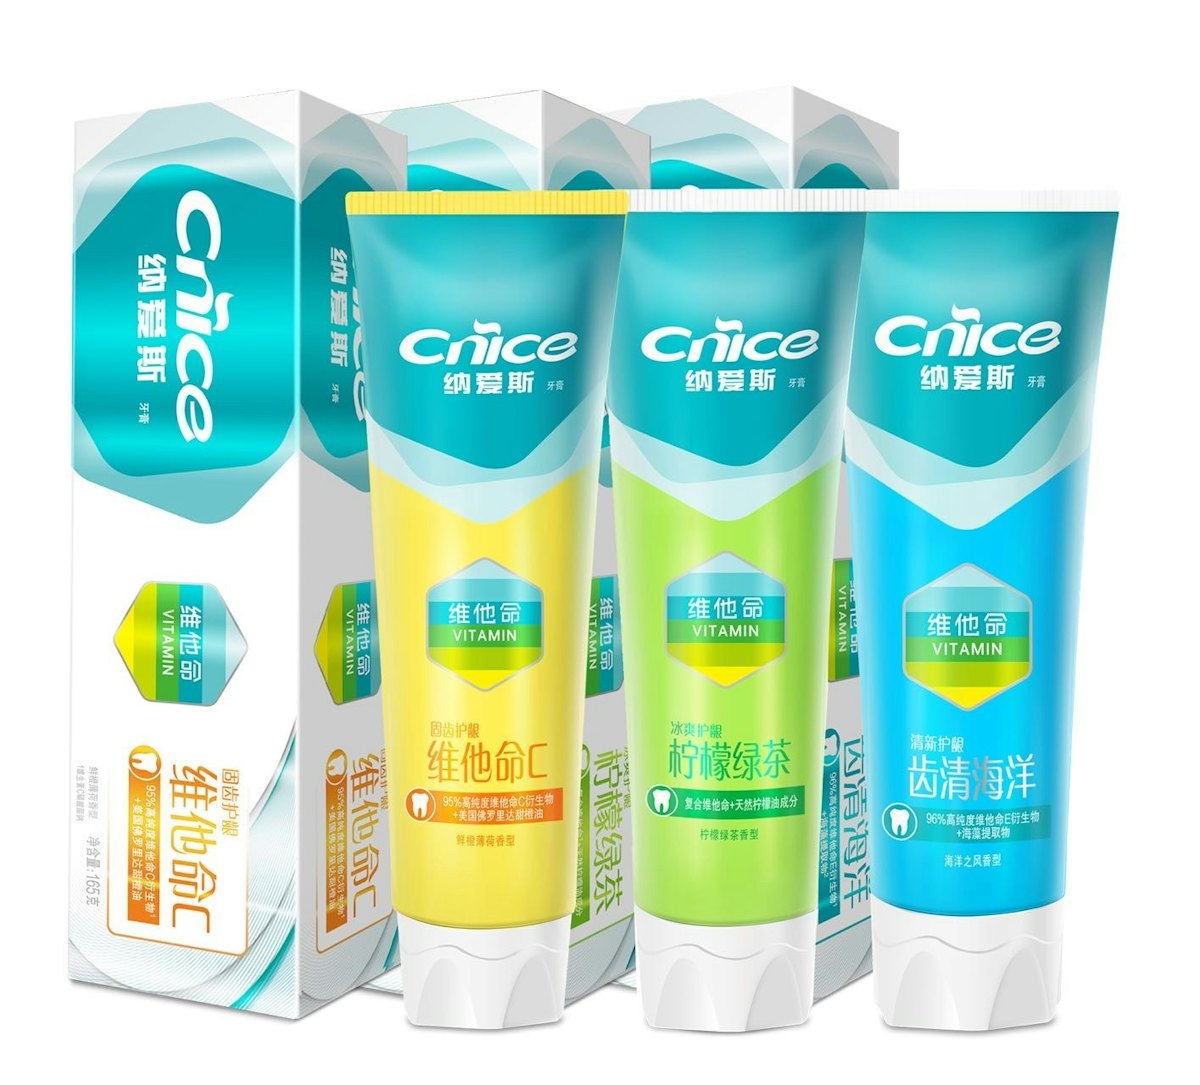 NICE and Dow Create Recyclable Toothpaste Tube